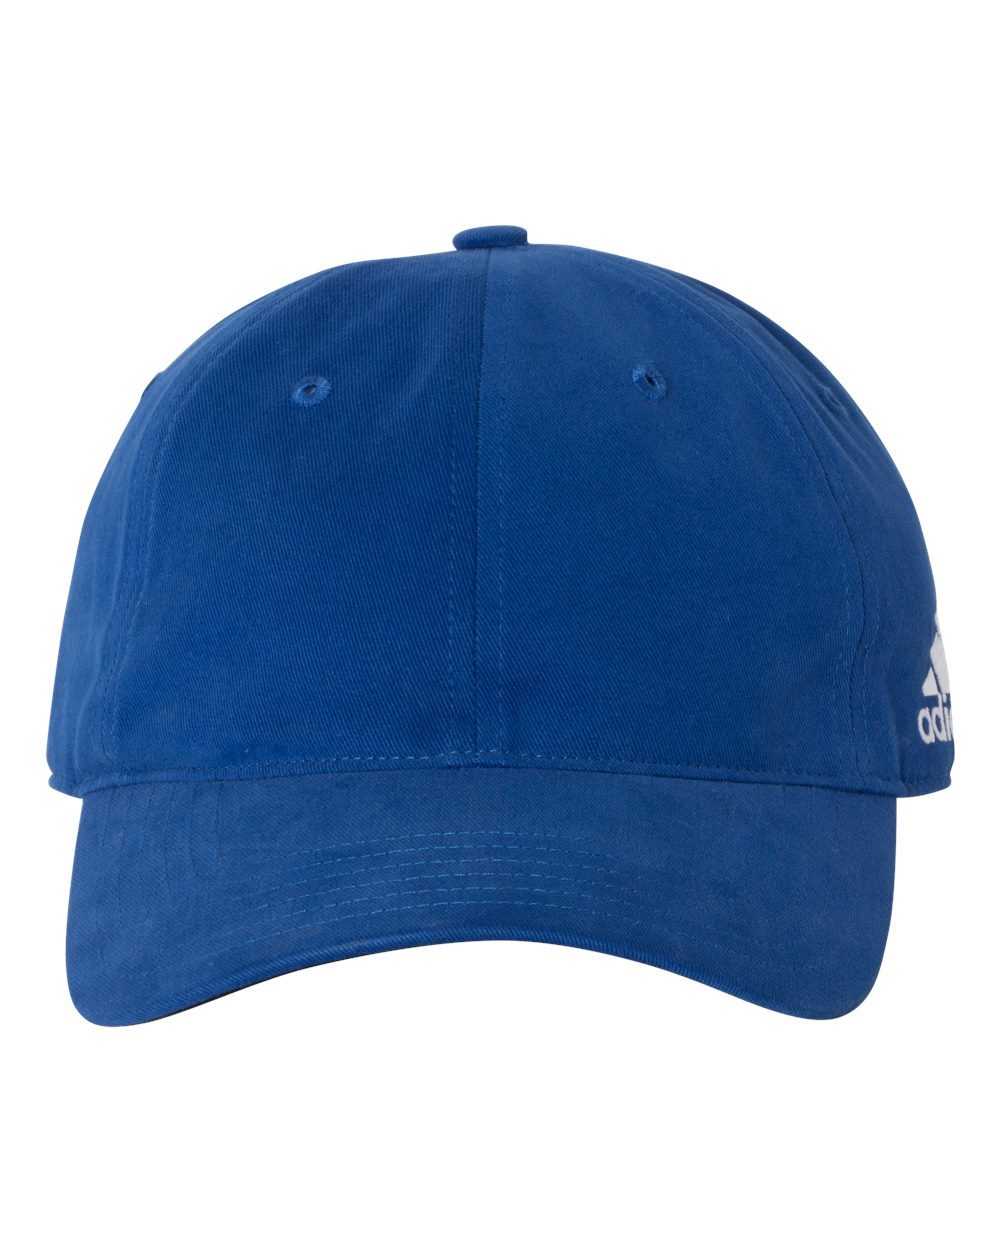 Adidas A12 - Core Performance Relaxed Cap